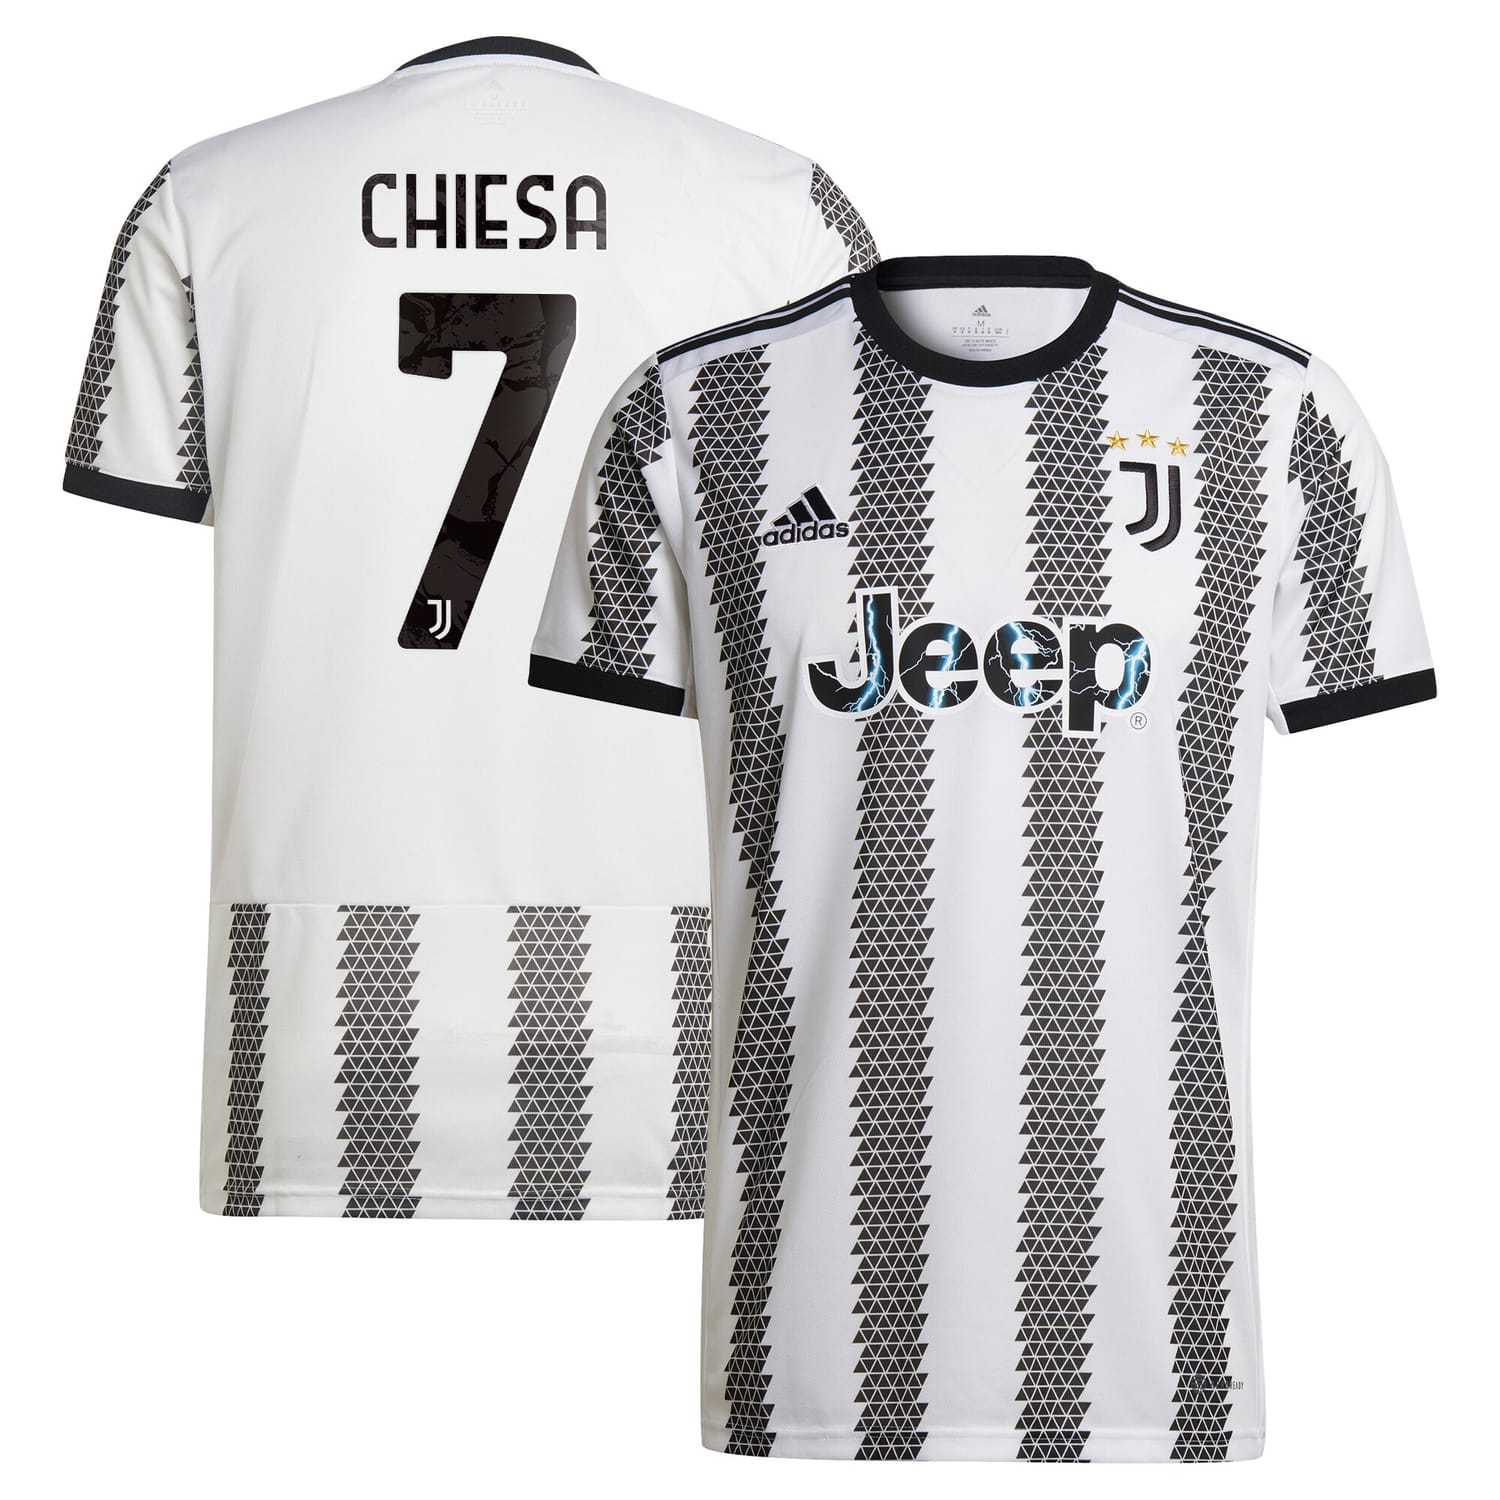 Serie A Juventus Home Jersey Shirt 2022-23 player Federico Chiesa 7 printing for Men